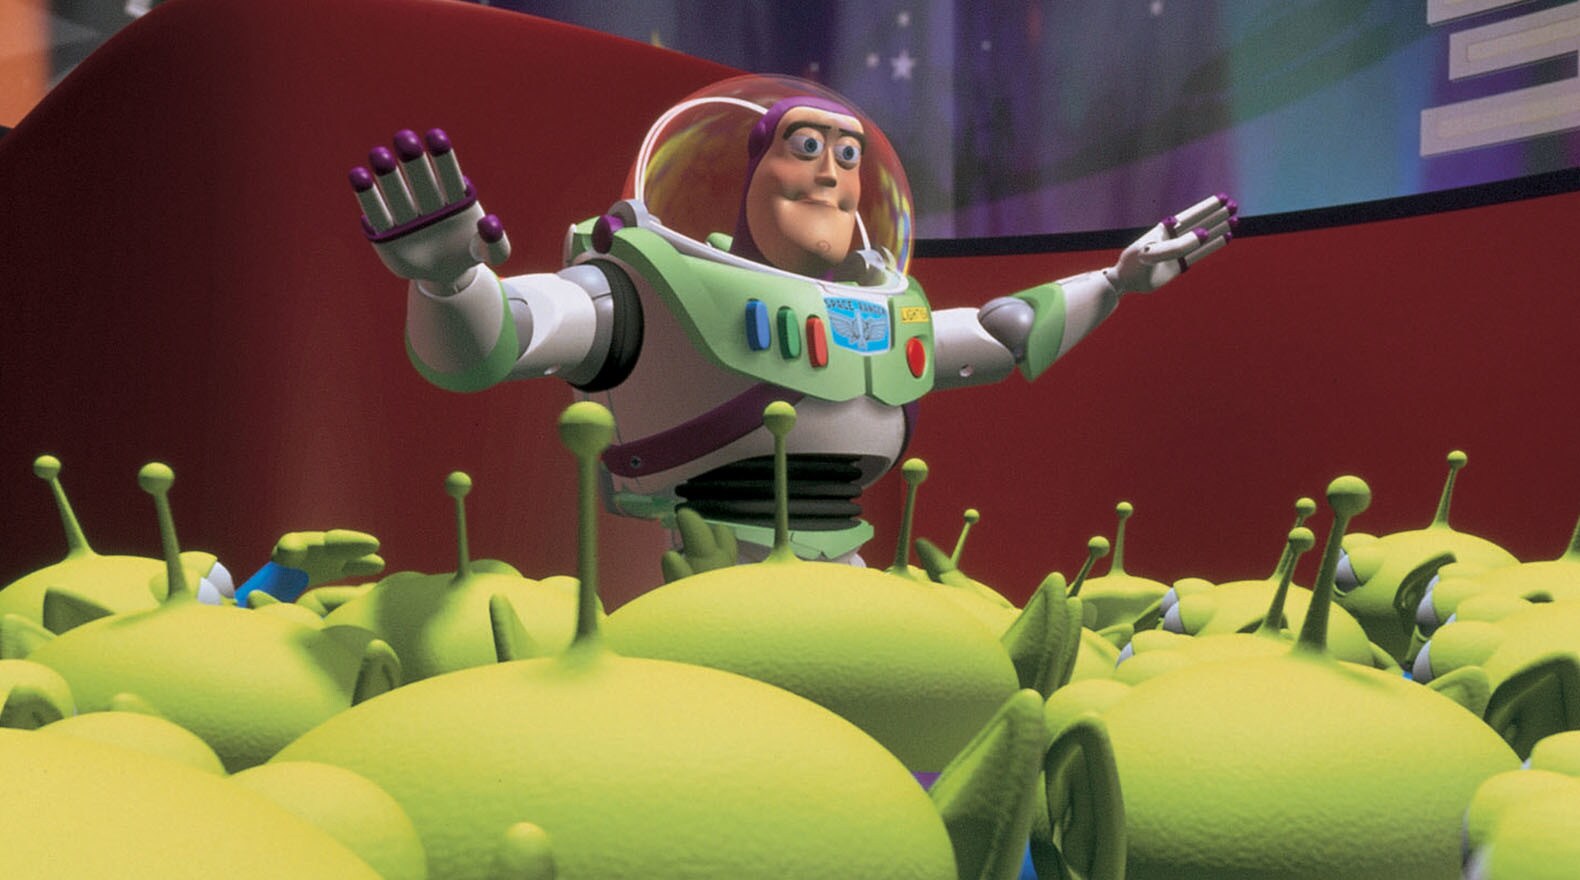 "I am Buzz Lightyear; I come in peace."